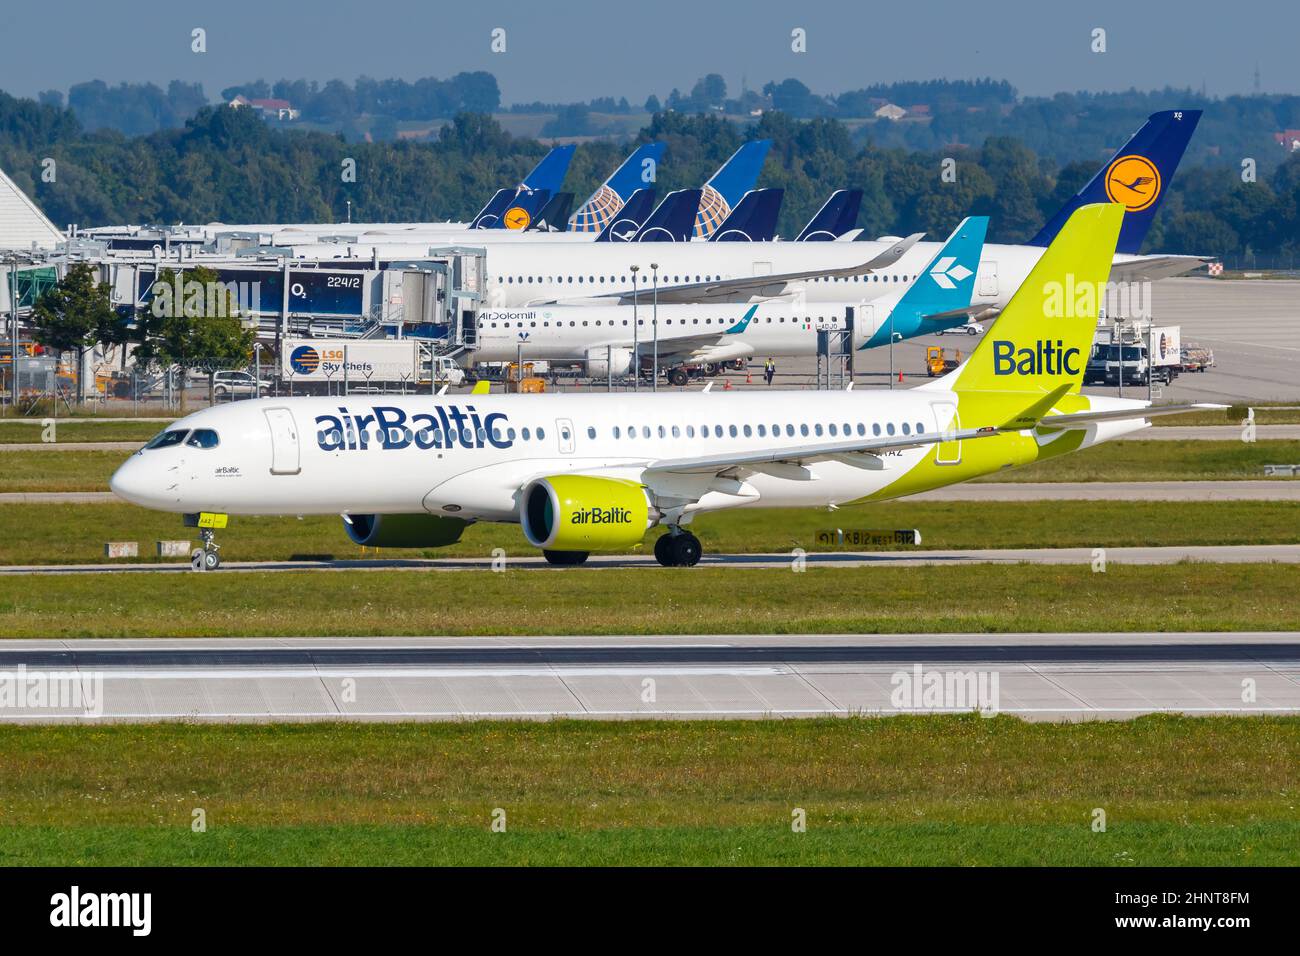 Air Baltic Airbus A220-300 airplane Munich airport in Germany Stock Photo